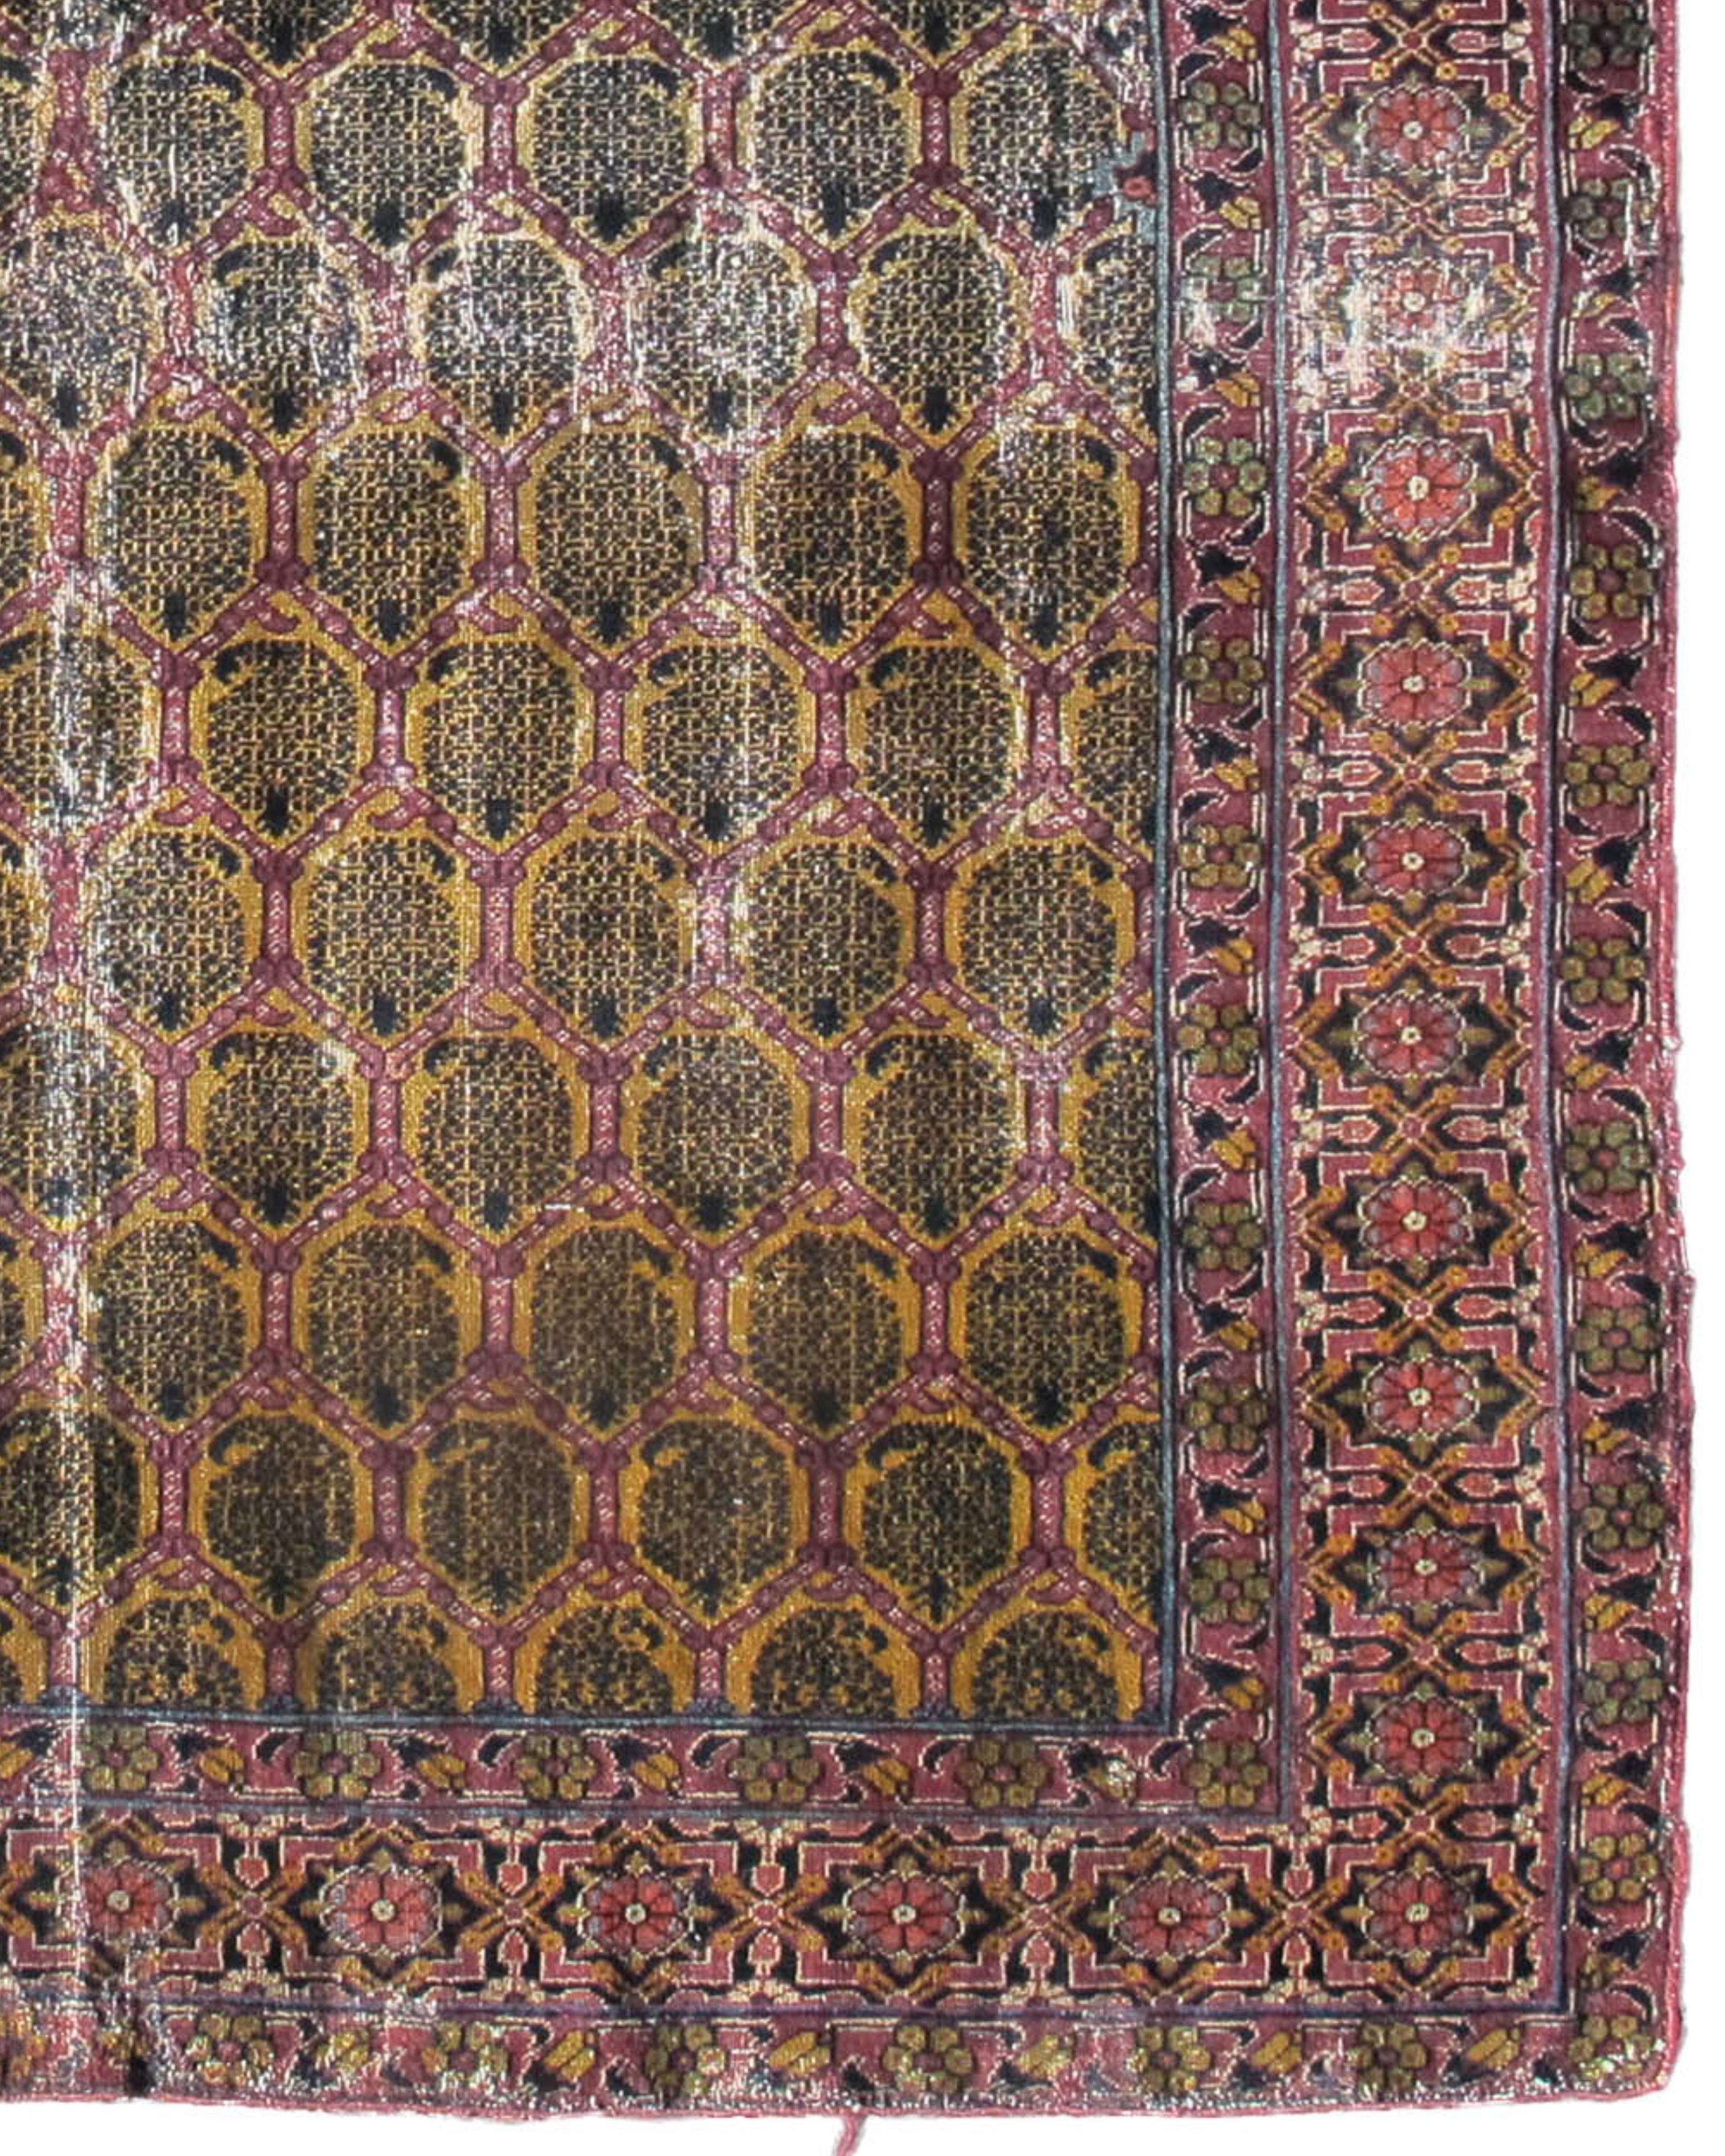 Antique Indo-Persian Prayer Rug, Early 19th Century

Additional Information:
Dimensions: 4'3